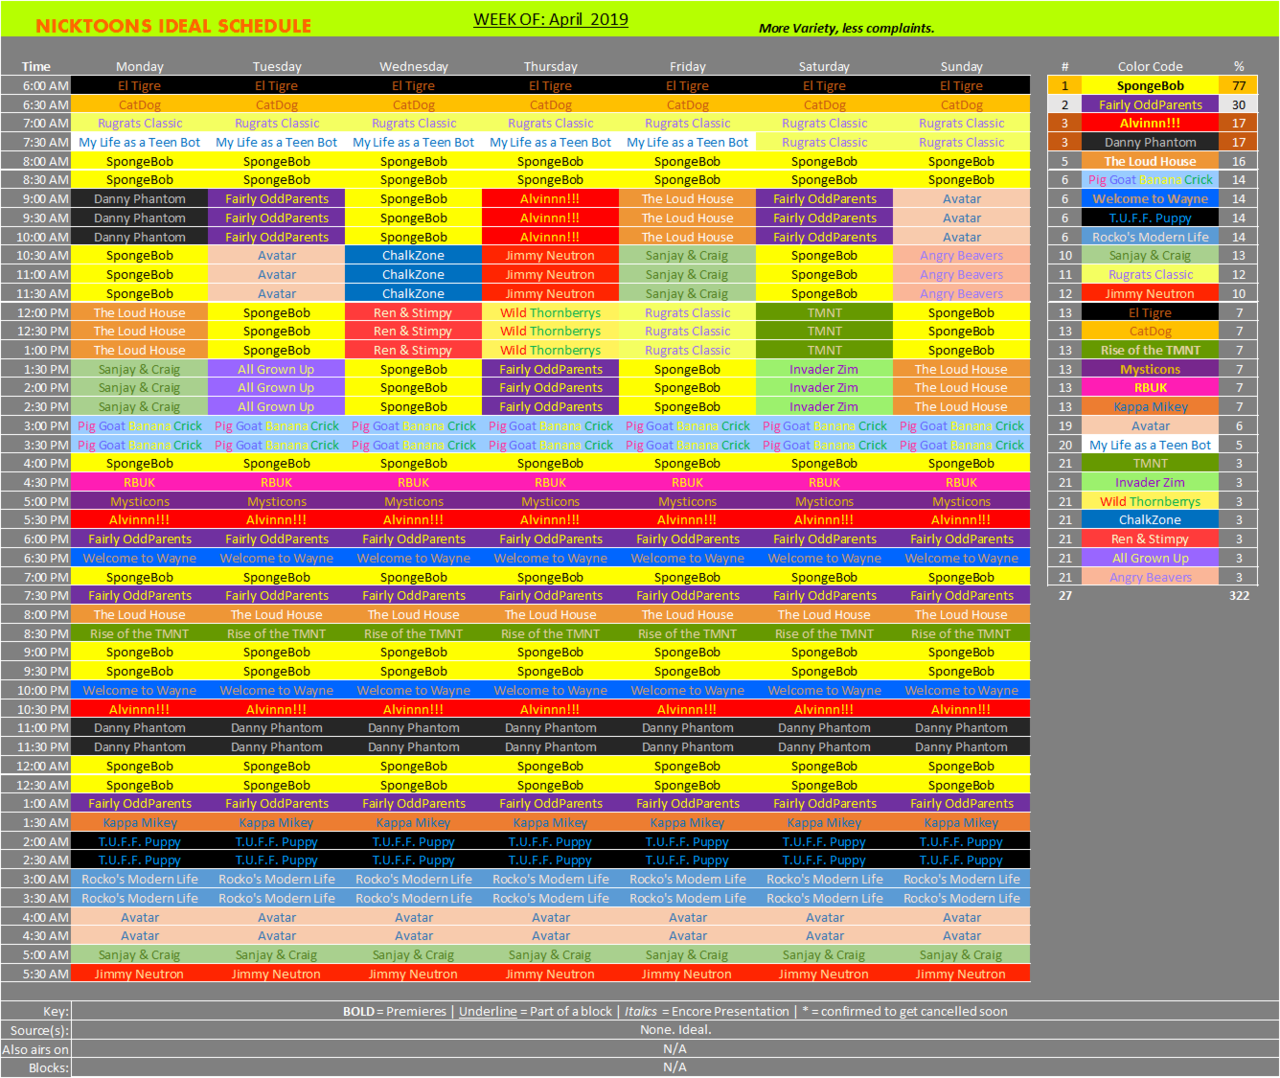 Nickelodeon Schedule Archive II... oh, and MORE! — More cartoons, less